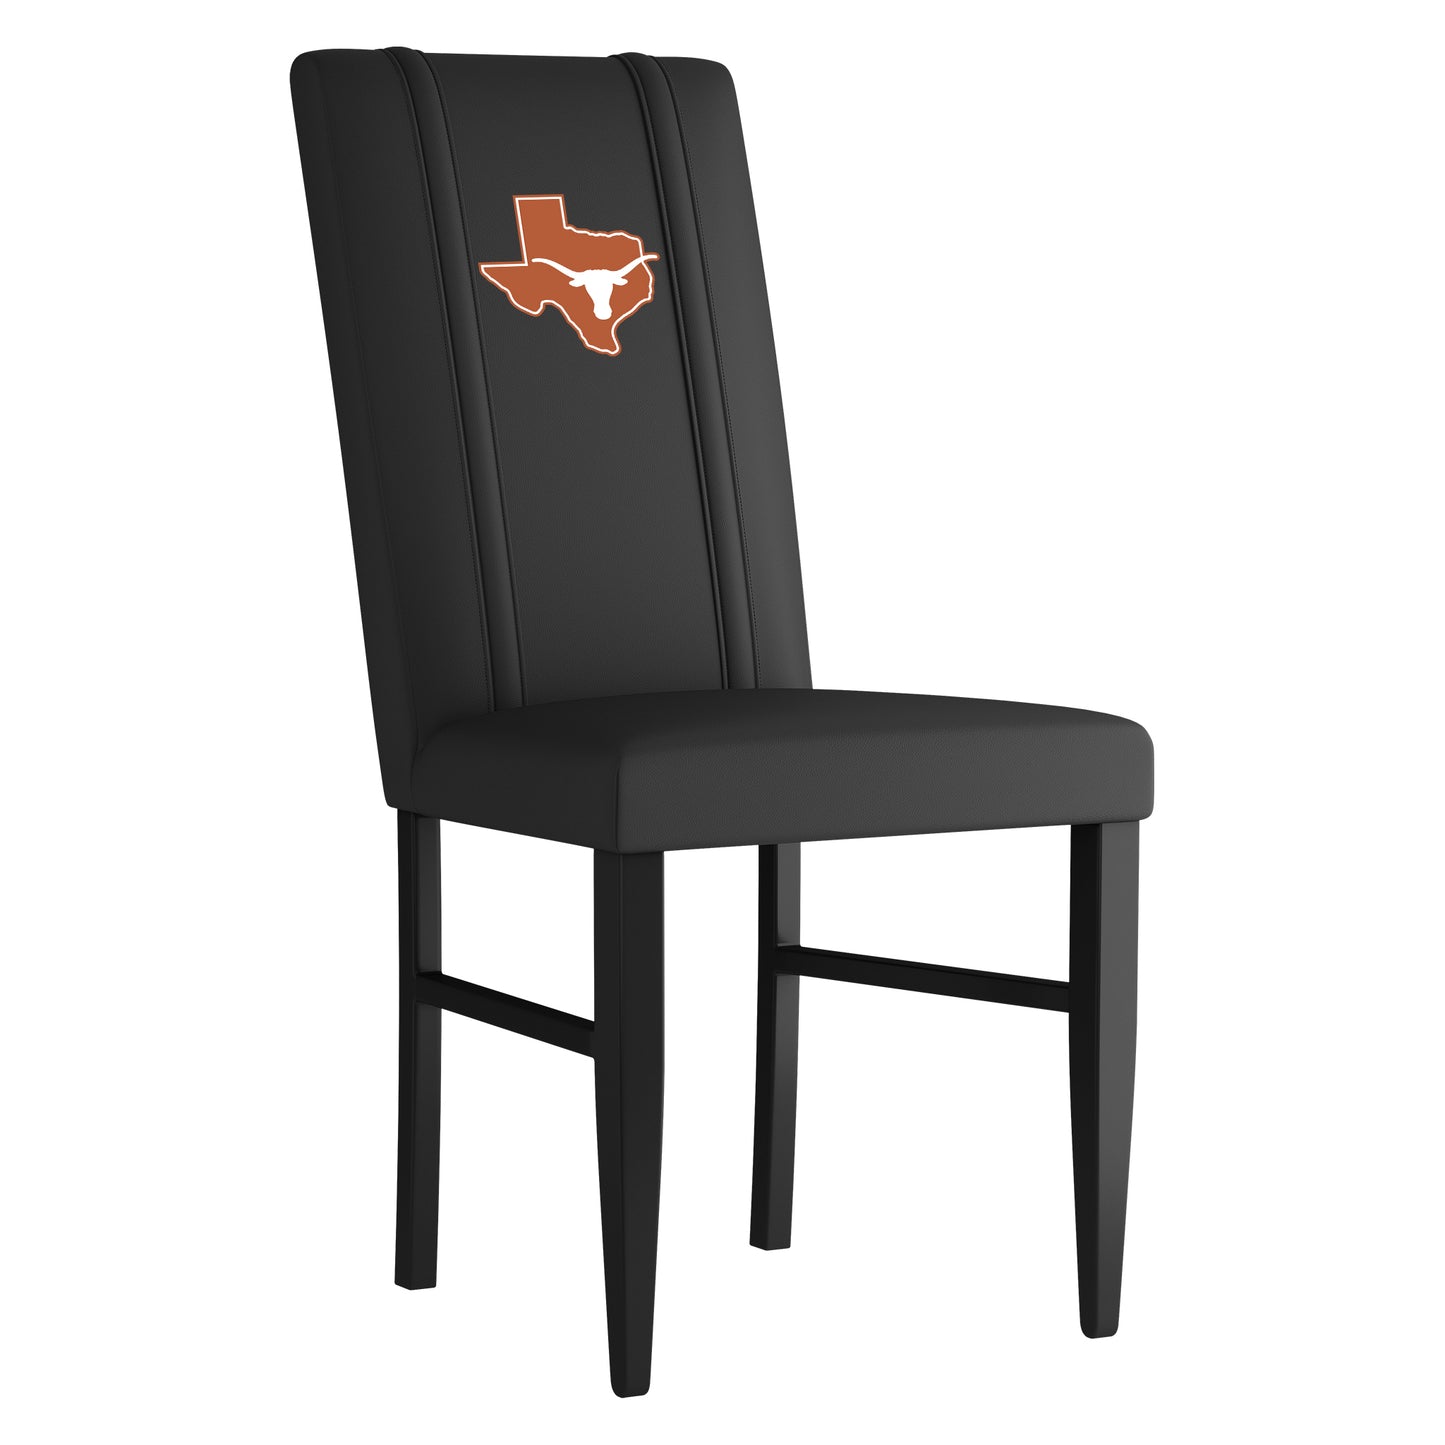 Side Chair 2000 with Texas Longhorns Secondary Set of 2